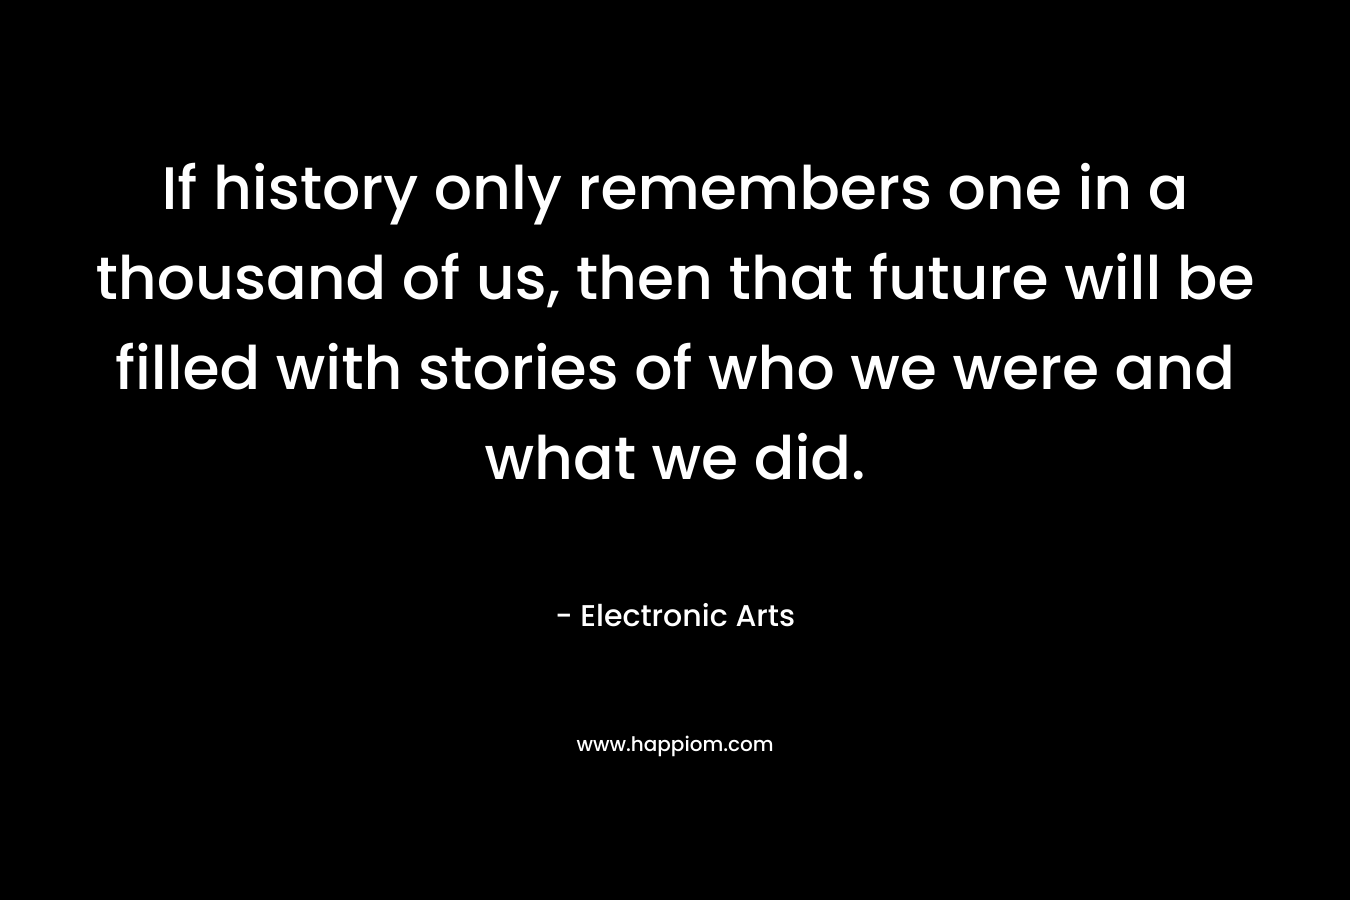 If history only remembers one in a thousand of us, then that future will be filled with stories of who we were and what we did.